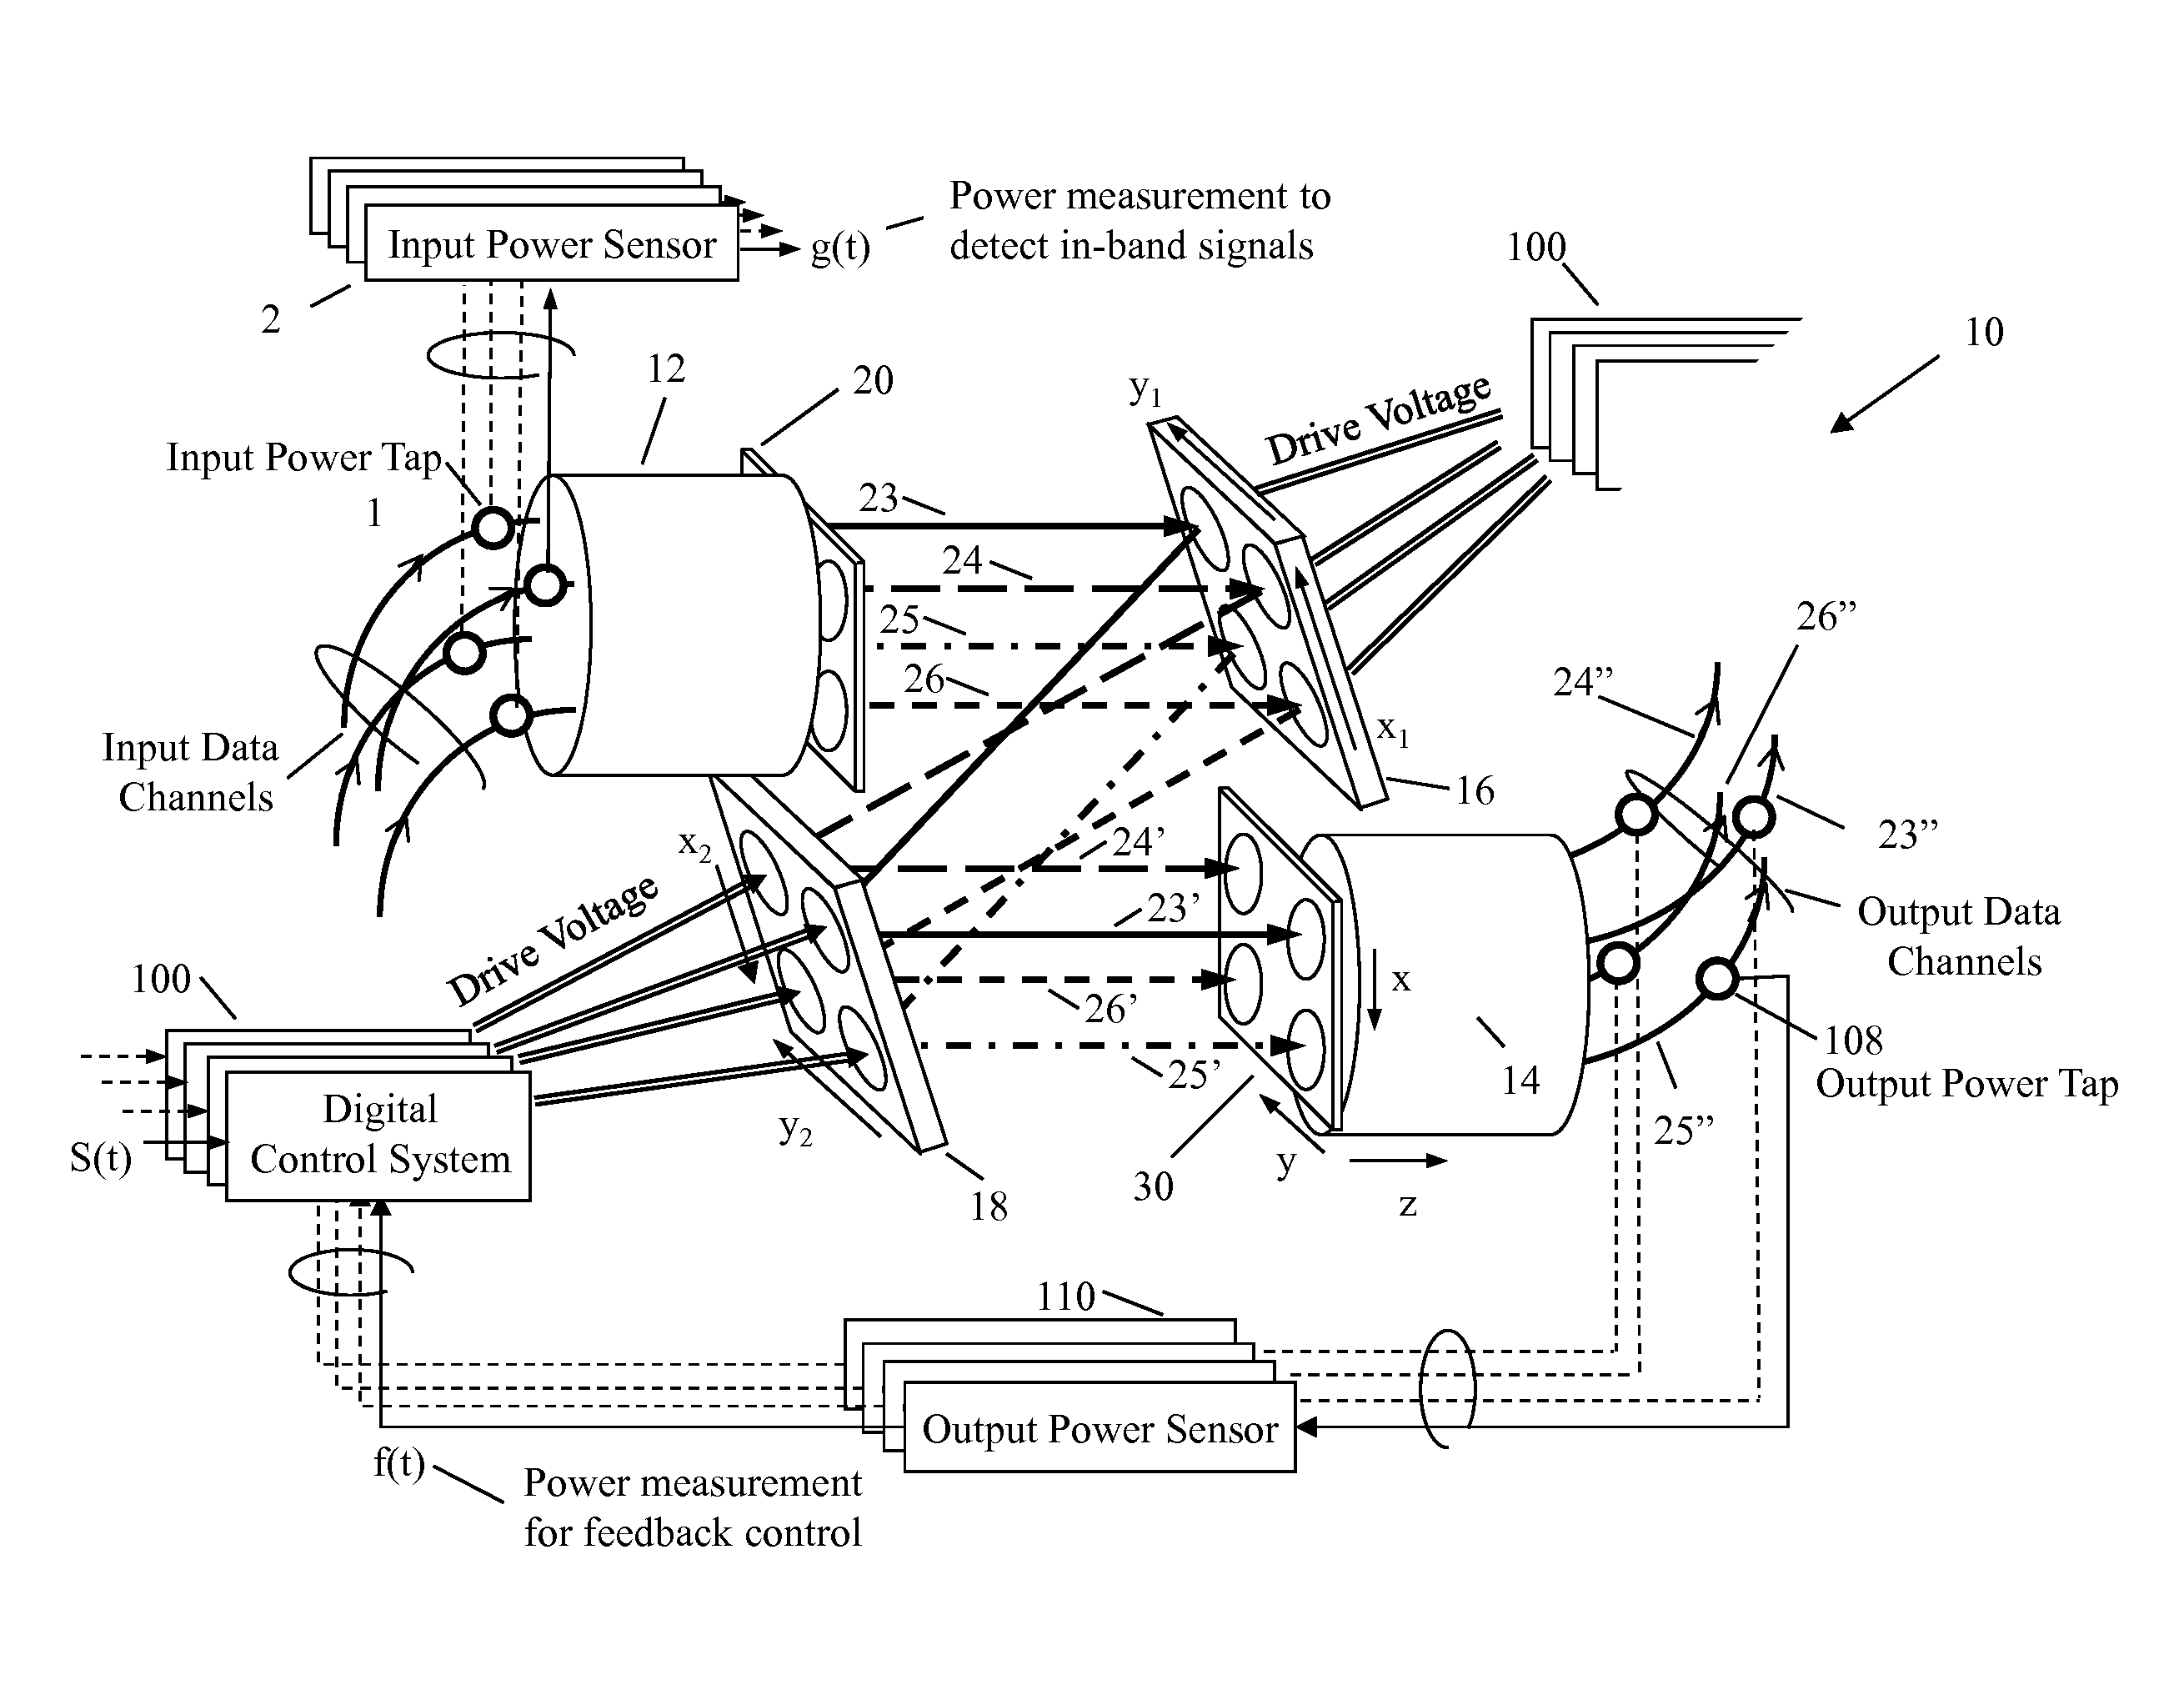 In-band signaling in optical cross-connect switch using frequency modulation